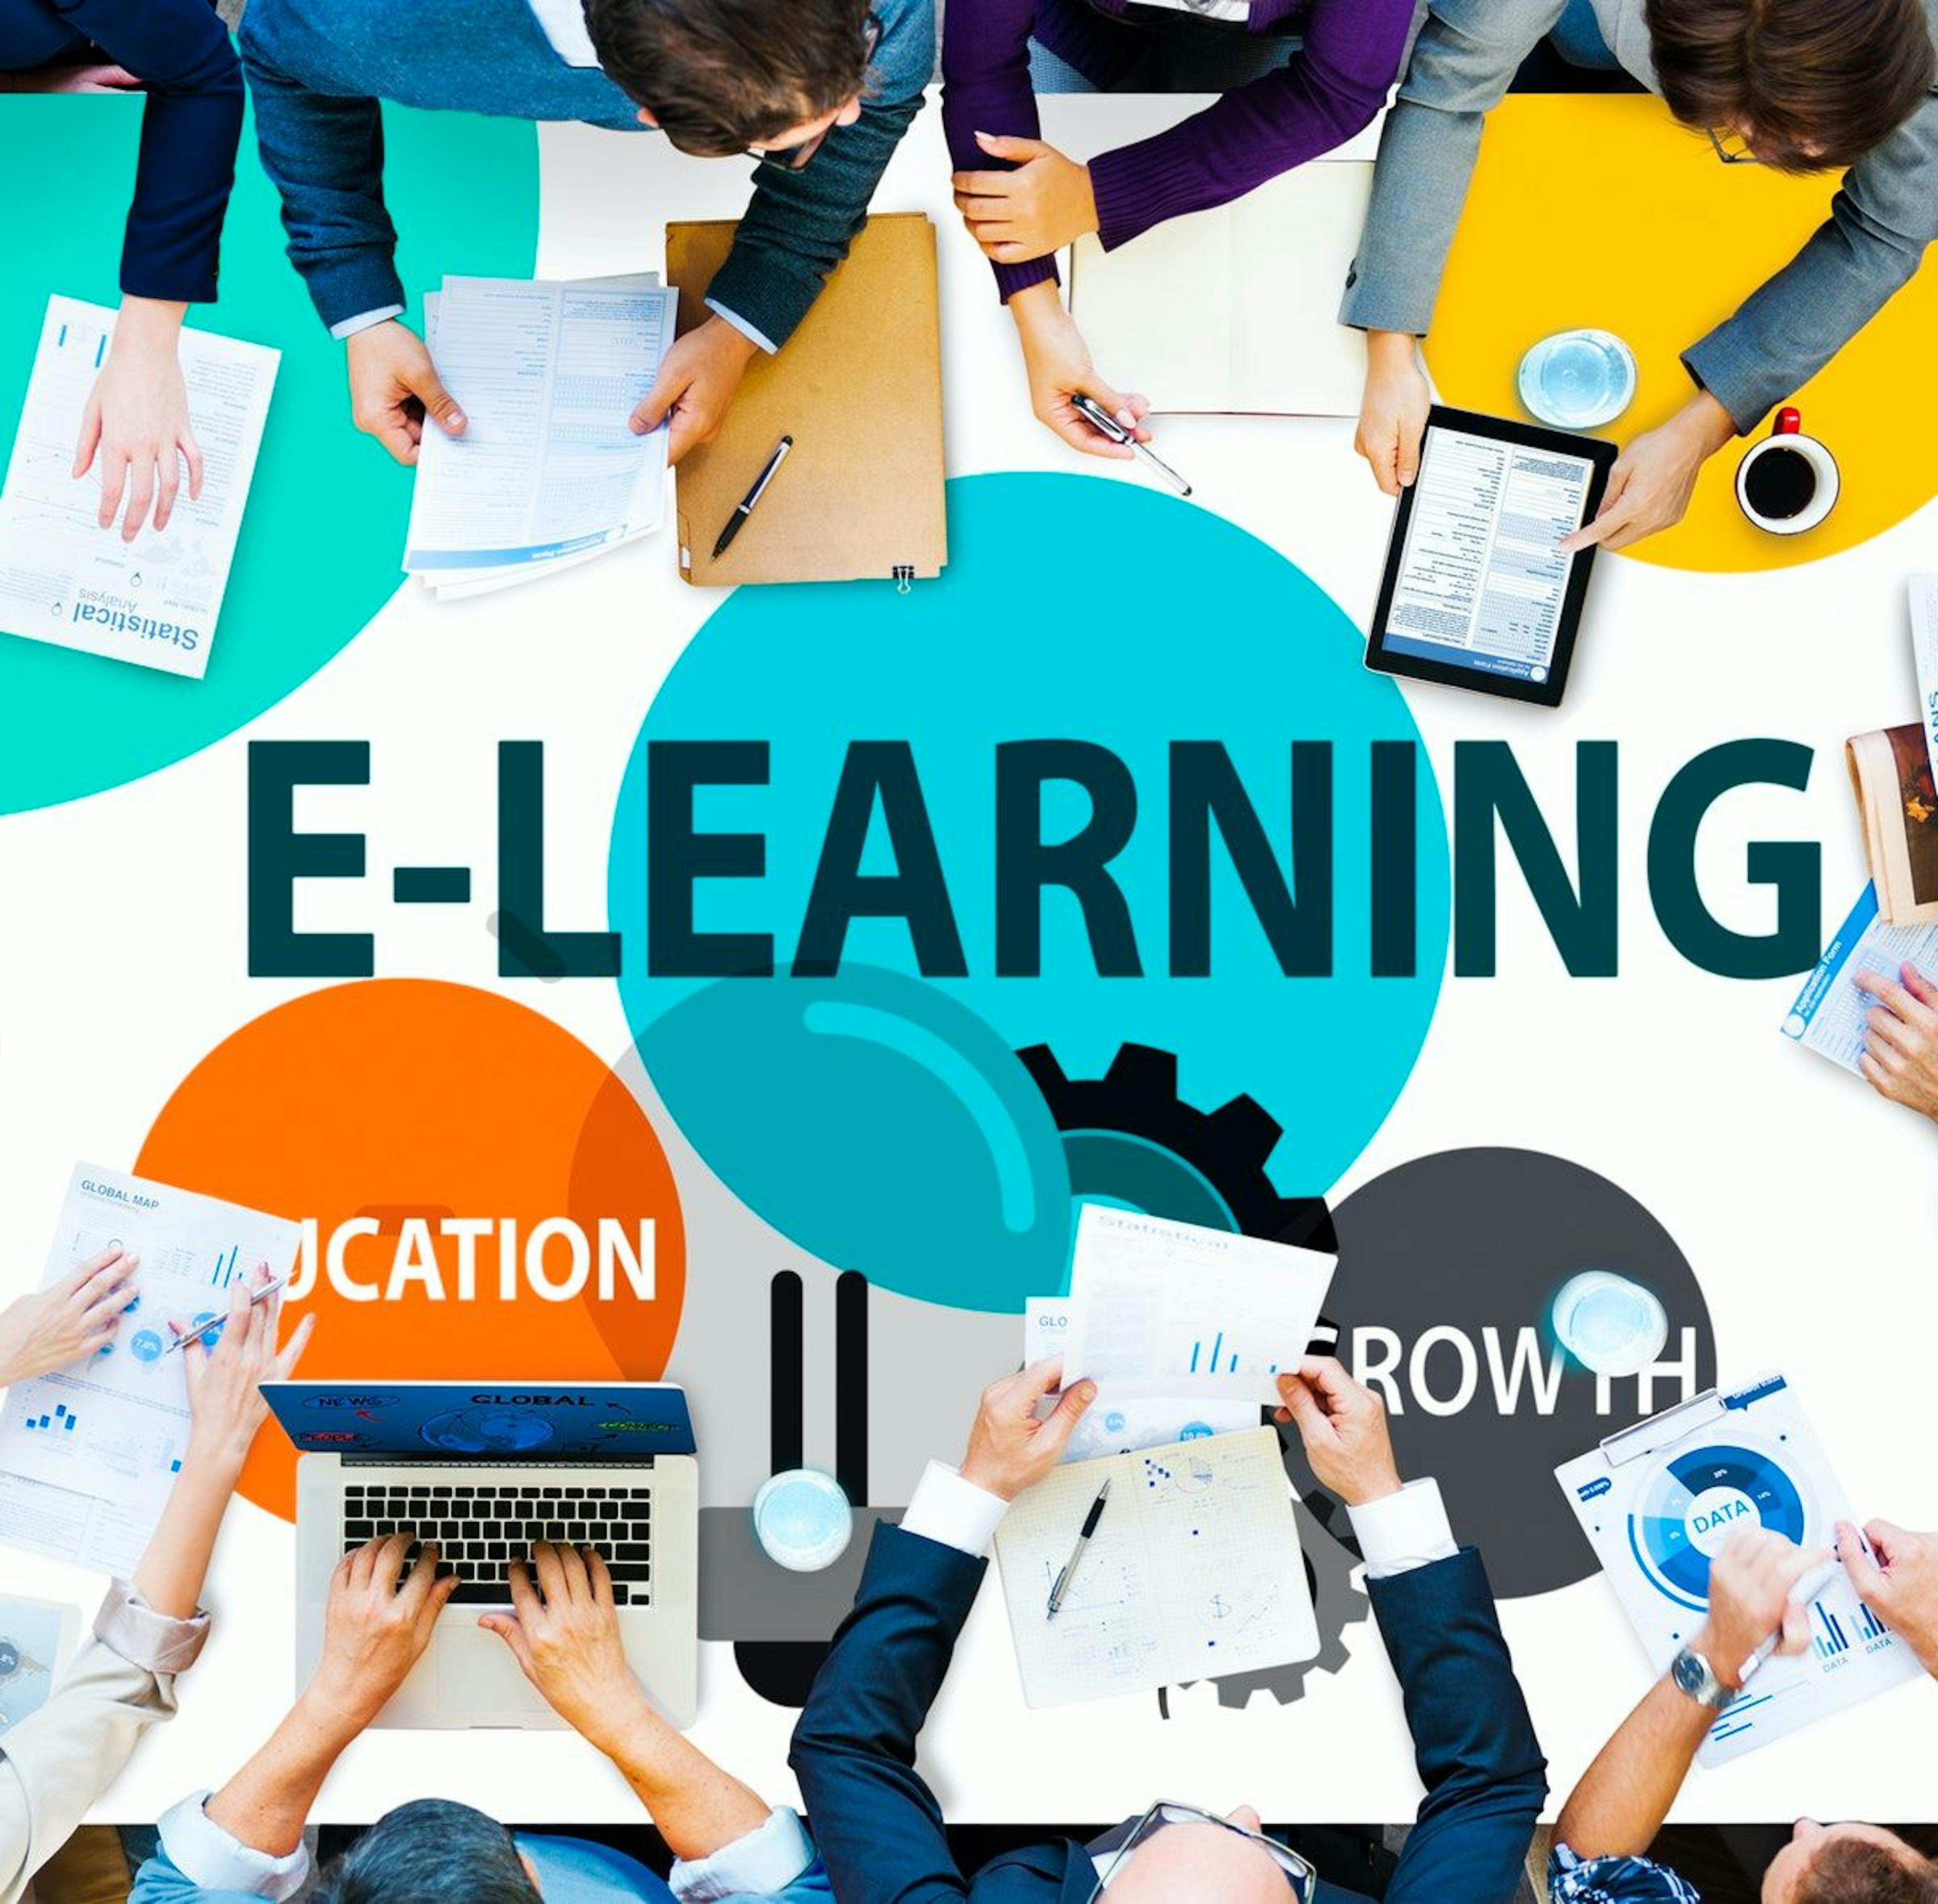 /5-reasons-why-elearning-might-become-the-new-normal-6n133ztc feature image